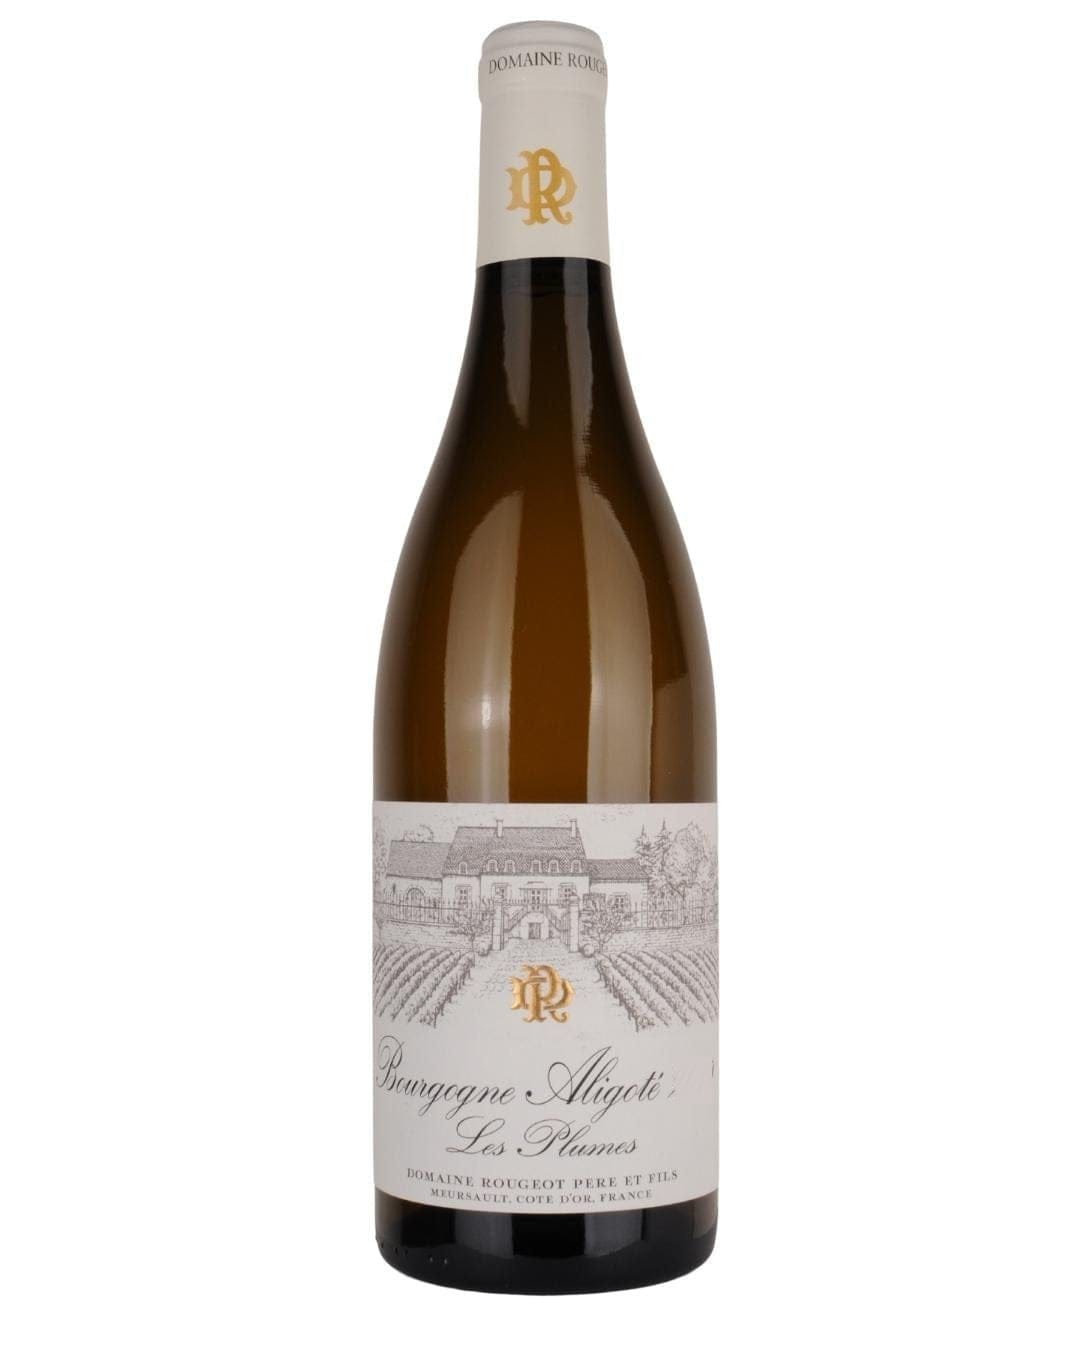 Shop Domaine Rougeot Père & Fils Domaine Rougeot Père et Fils Bourgogne Aligoté Les Plumes 2020 online at PENTICTON artisanal French wine store in Hong Kong. Discover other French wines, promotions, workshops and featured offers at pentictonpacific.com 